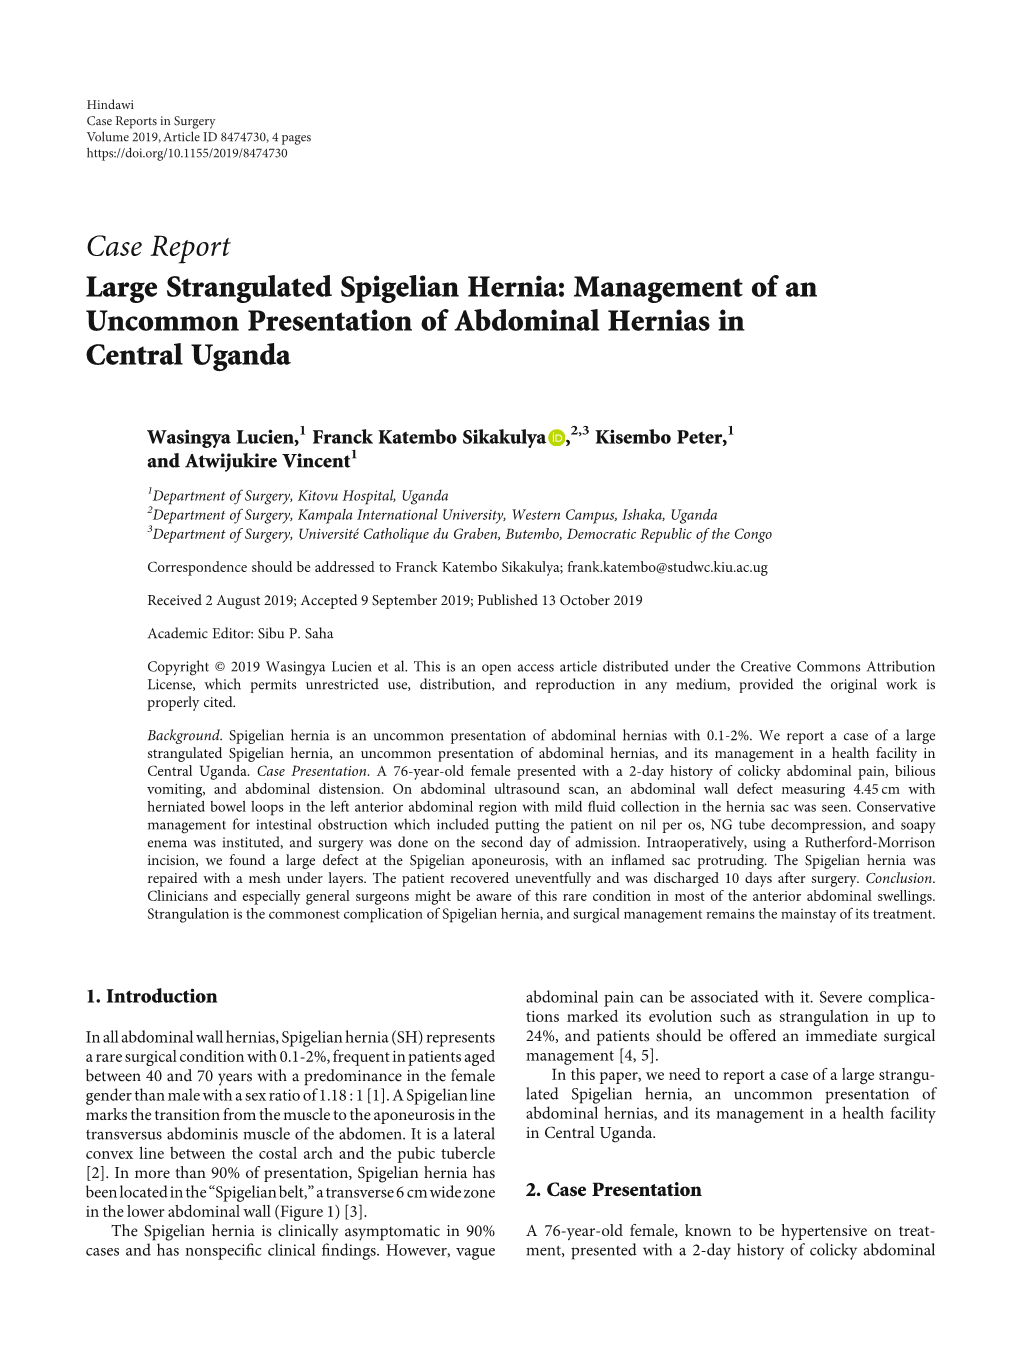 Case Report Large Strangulated Spigelian Hernia: Management of an Uncommon Presentation of Abdominal Hernias in Central Uganda